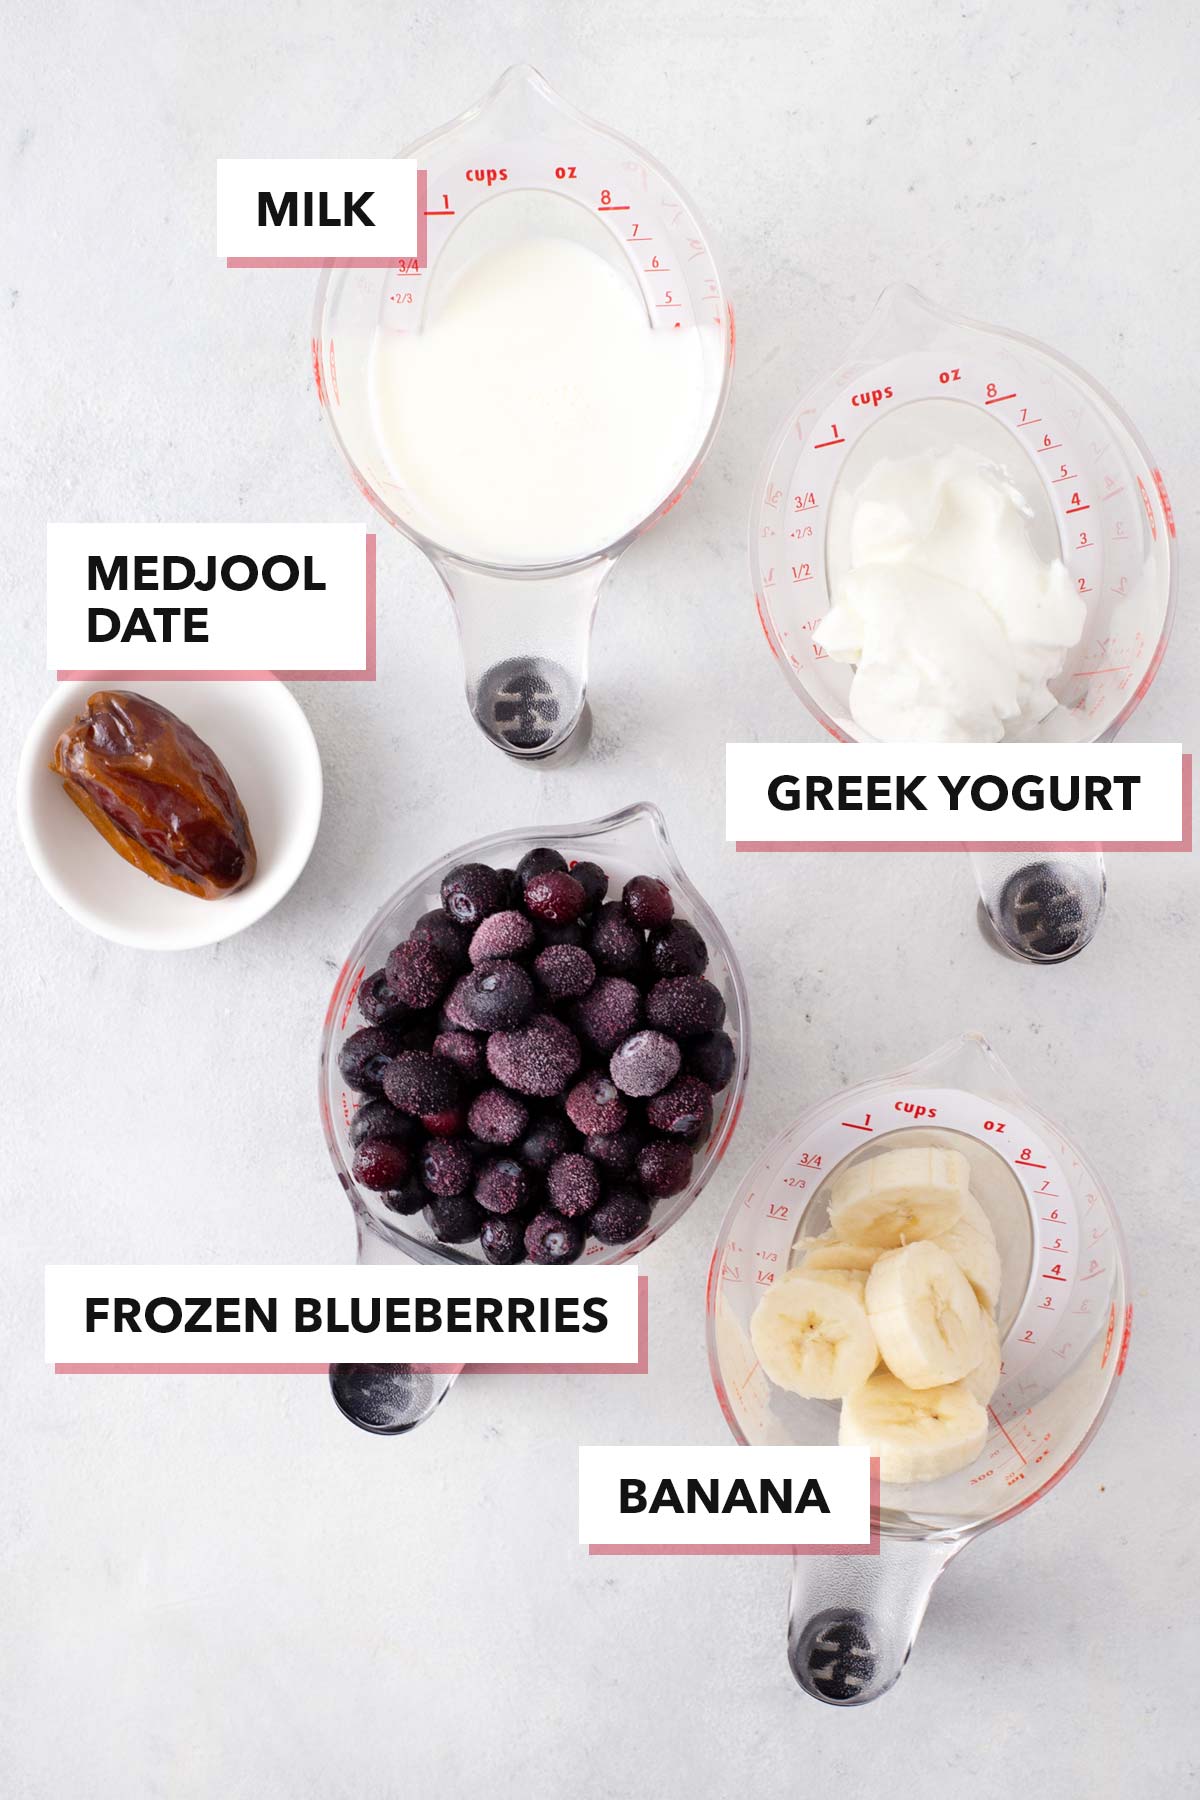 Blueberry smoothie ingredients.